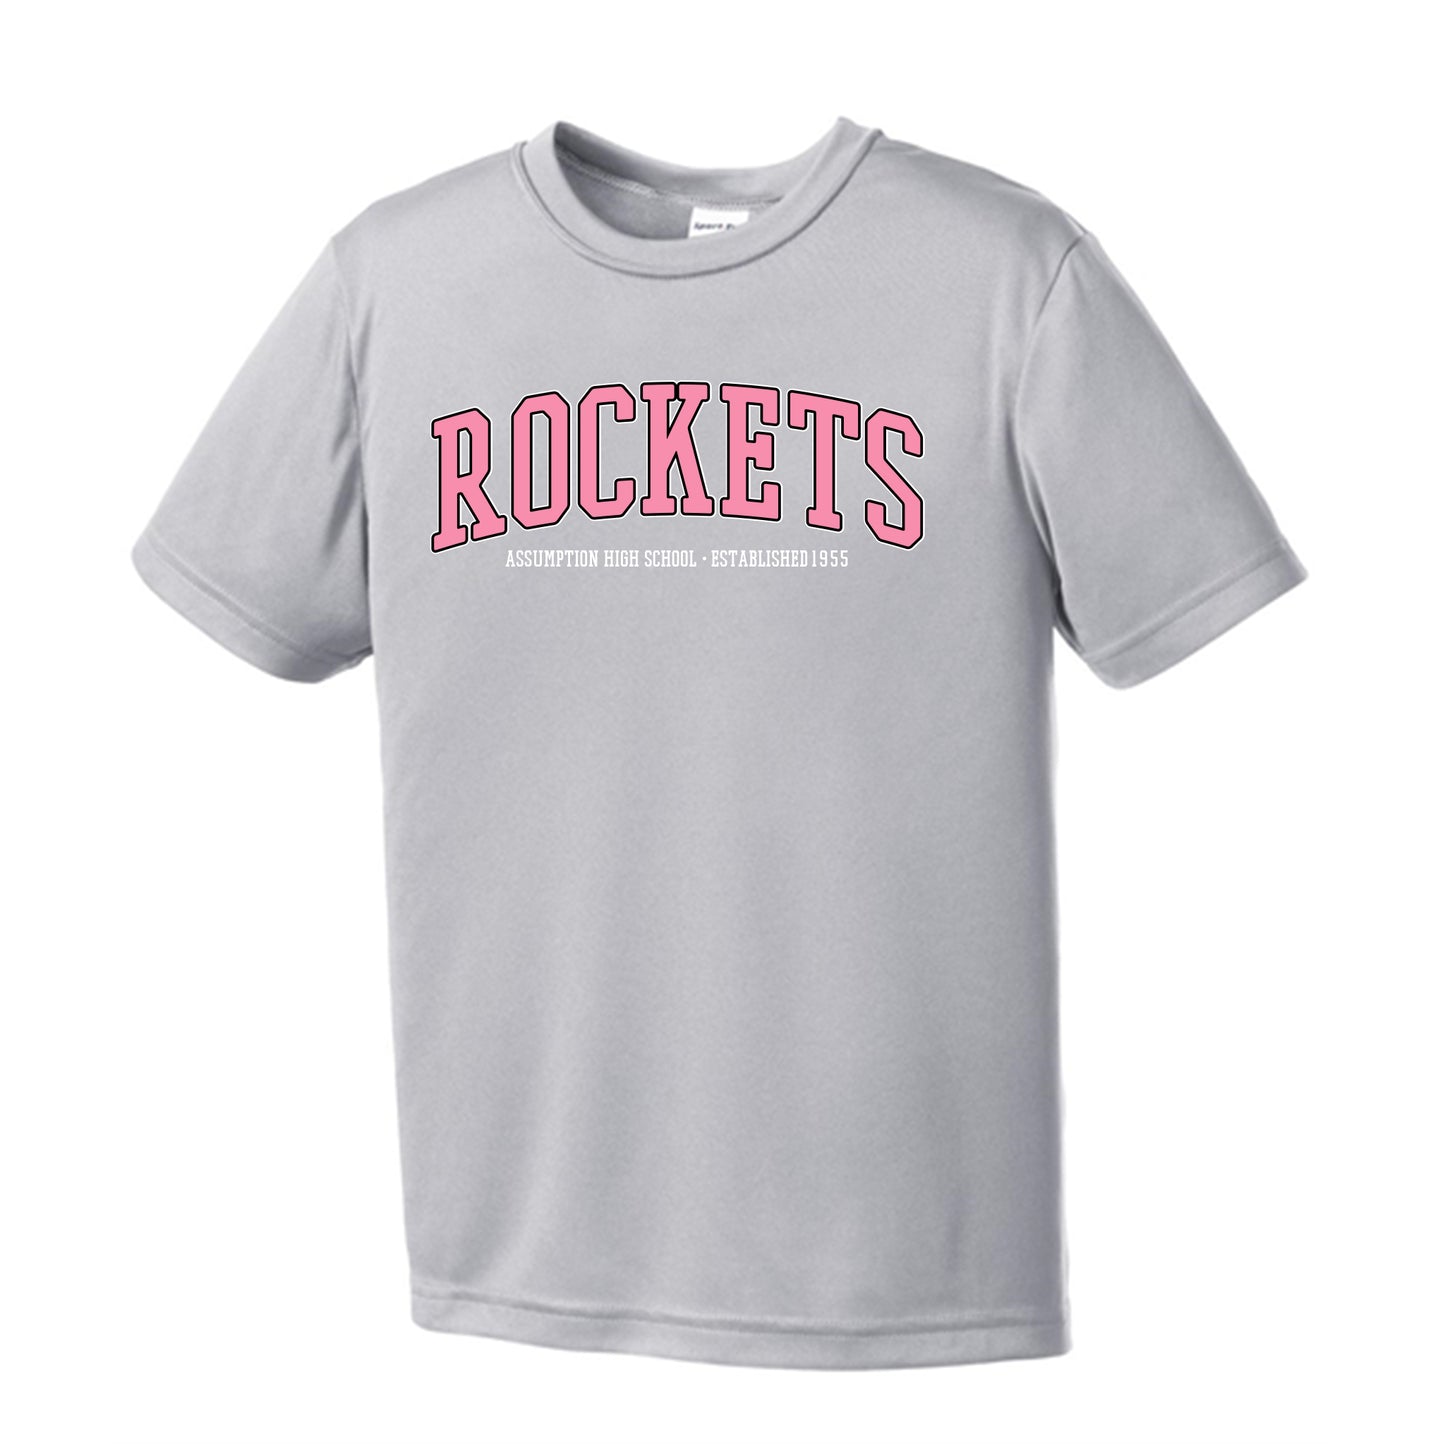 T-shirt - Grey - Adidas Dry Fit - Pink Rockets (Ladies, Unisex and Youth)